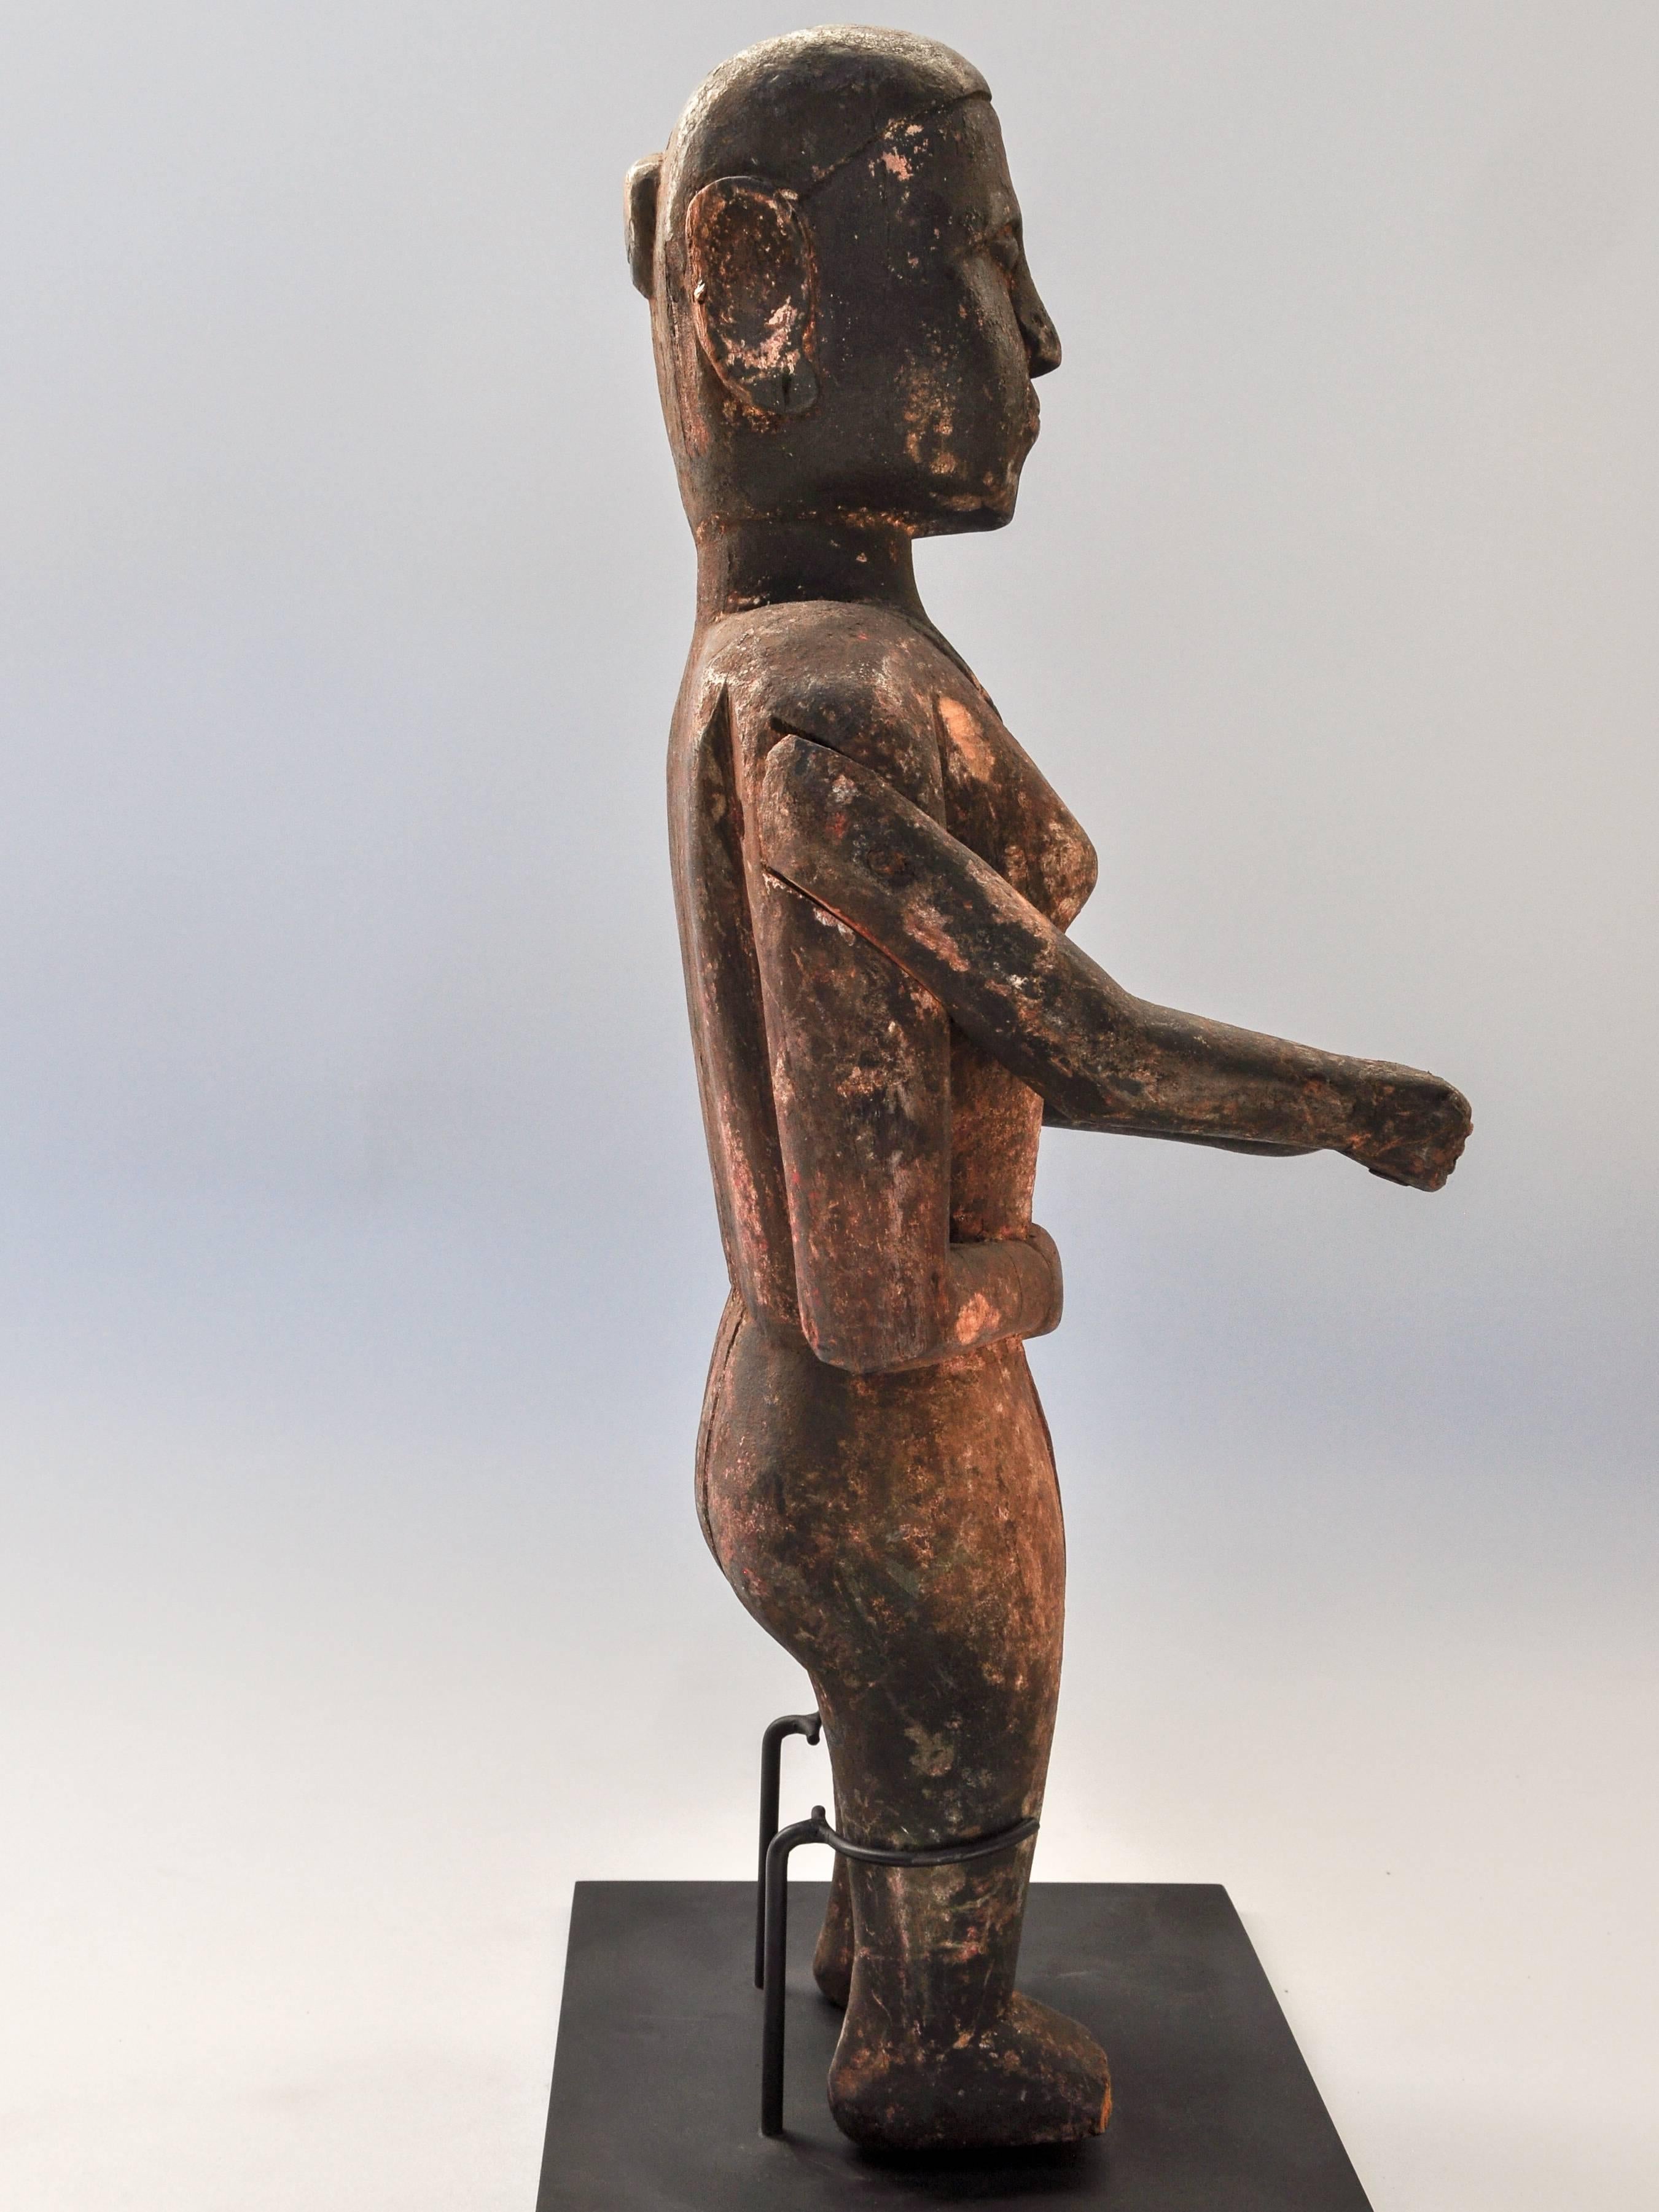 Tribal Wood Carved Statue Tharu People Southern Nepal, Early-Mid 20th Century.